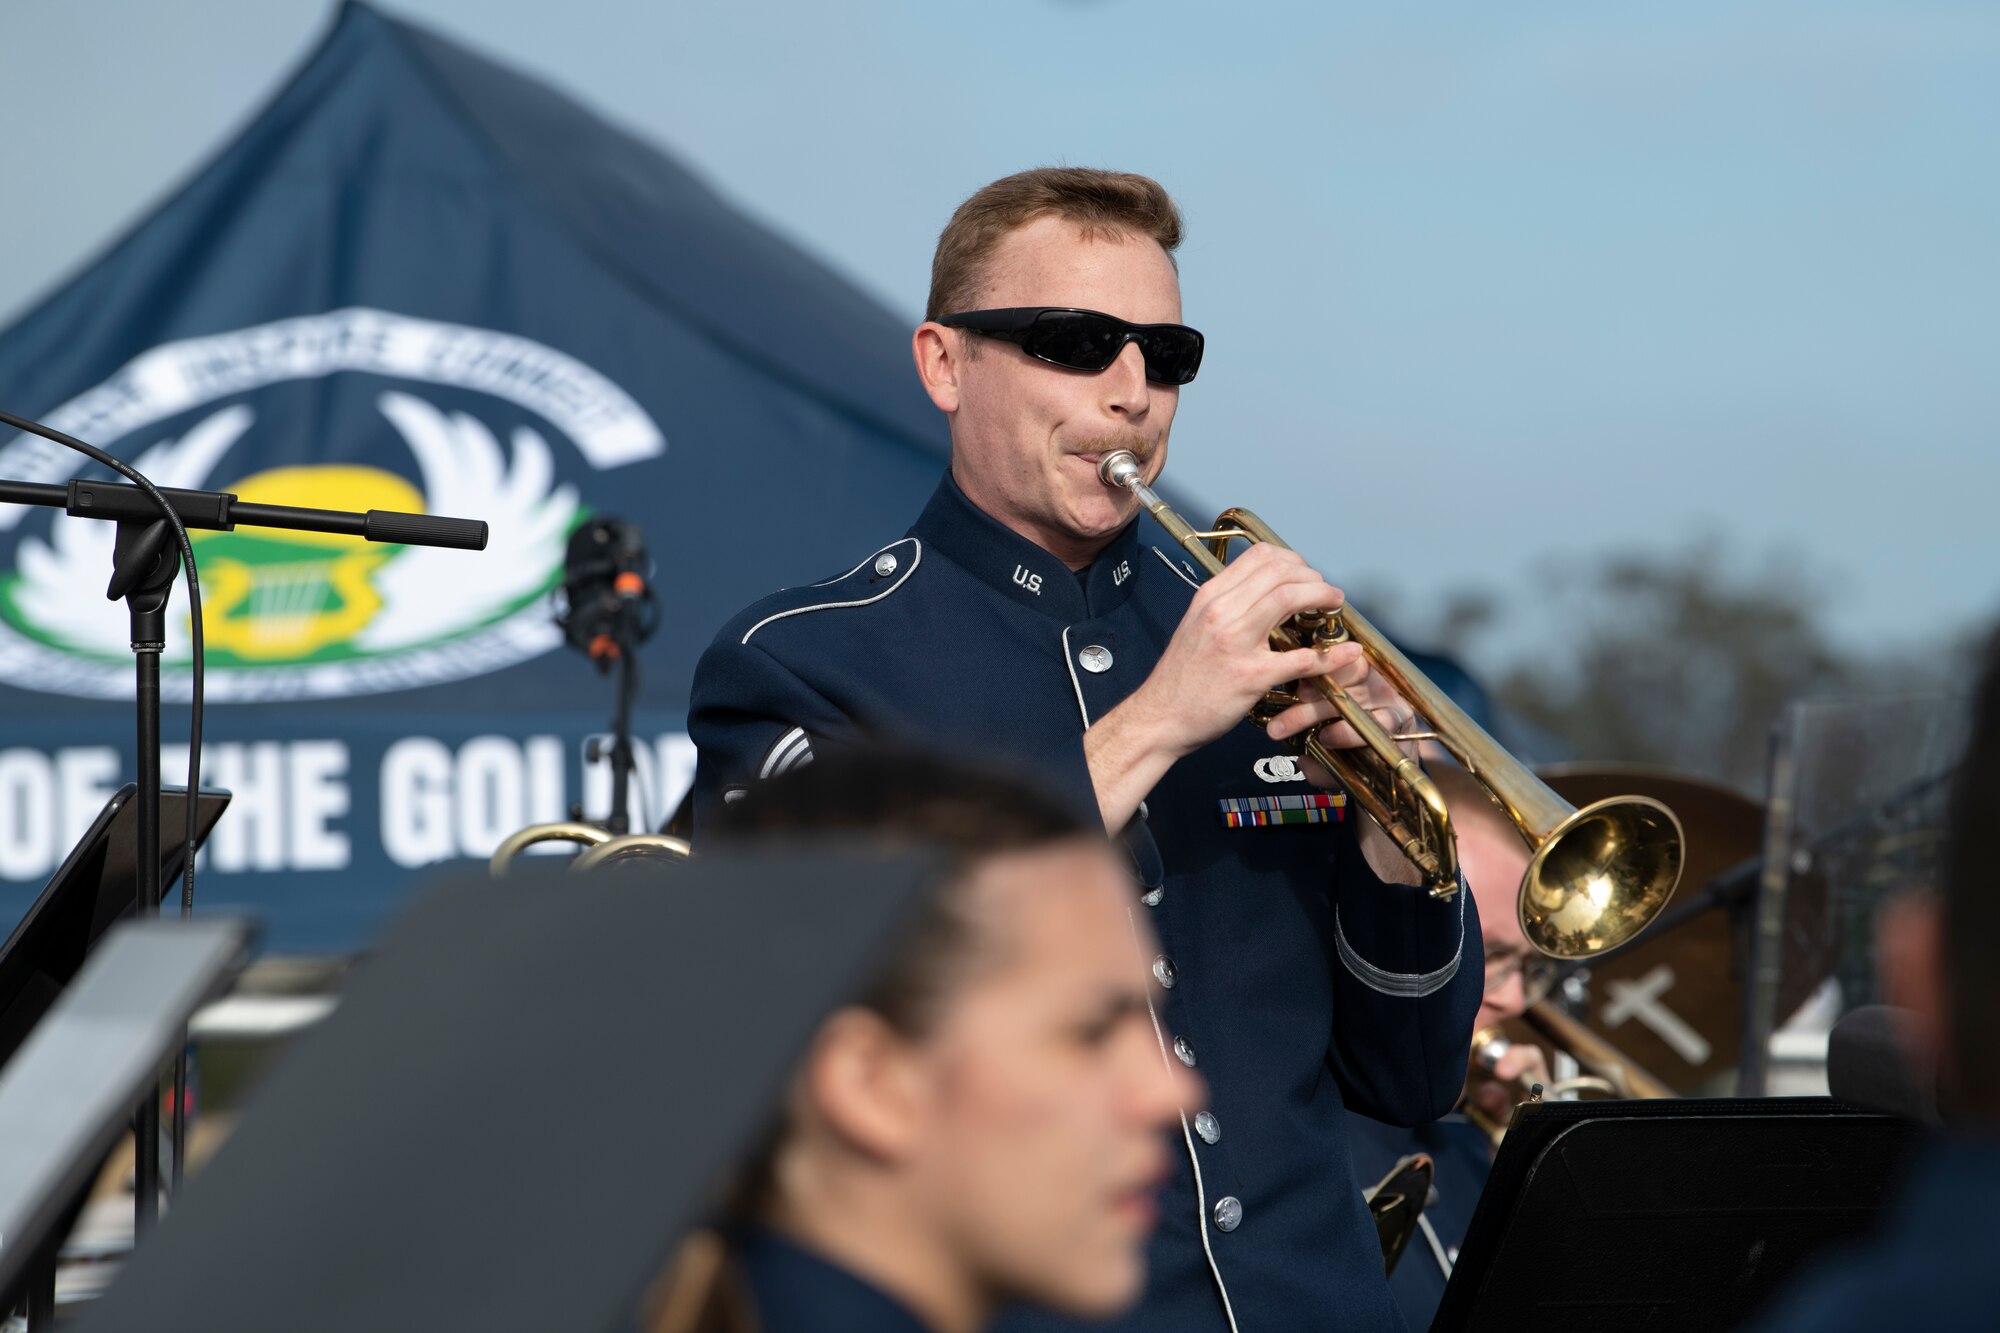 Airman plays the trumpet.